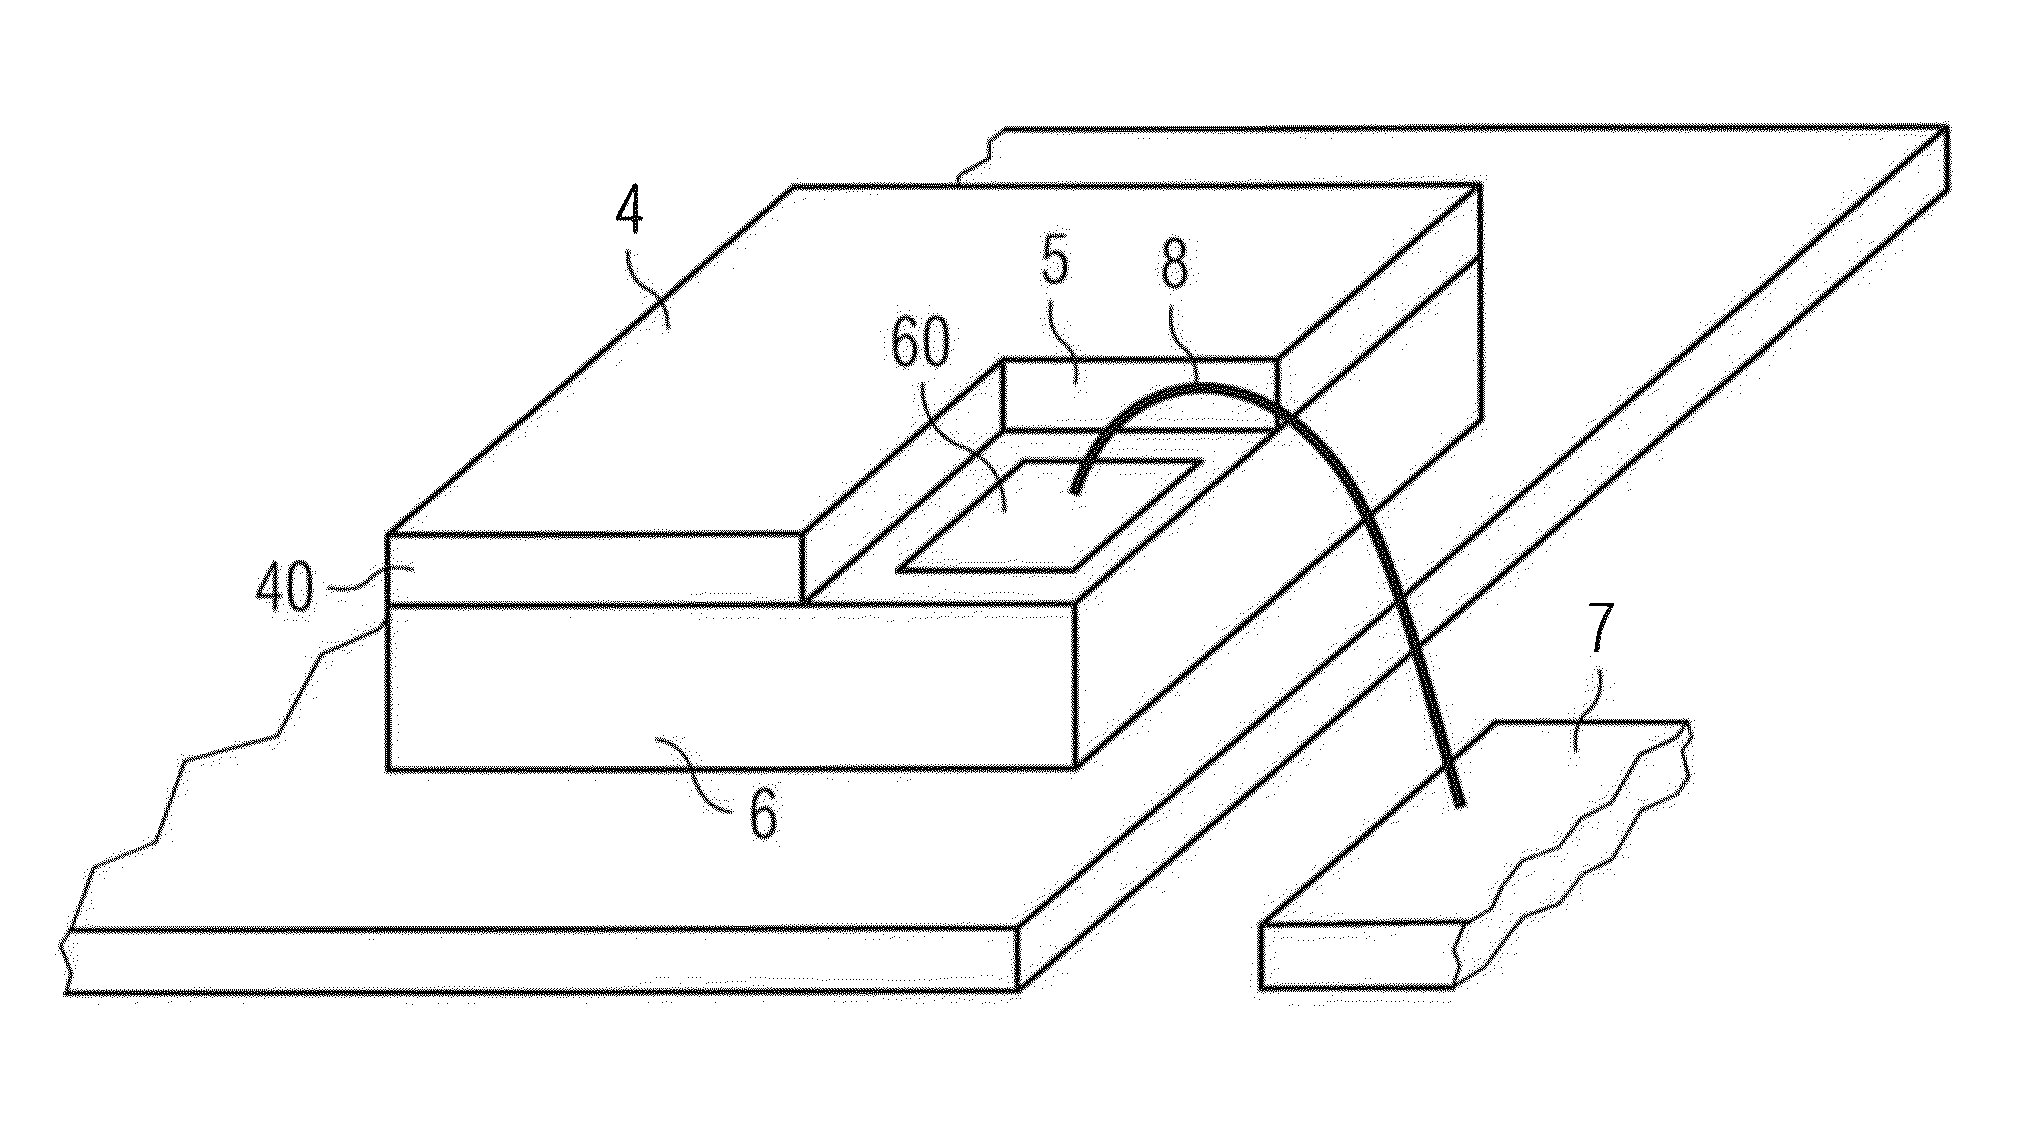 Luminescence Conversion Element, Method for the Manufacture Thereof and Optoelectronic Component Having a Luminescence Conversion Element